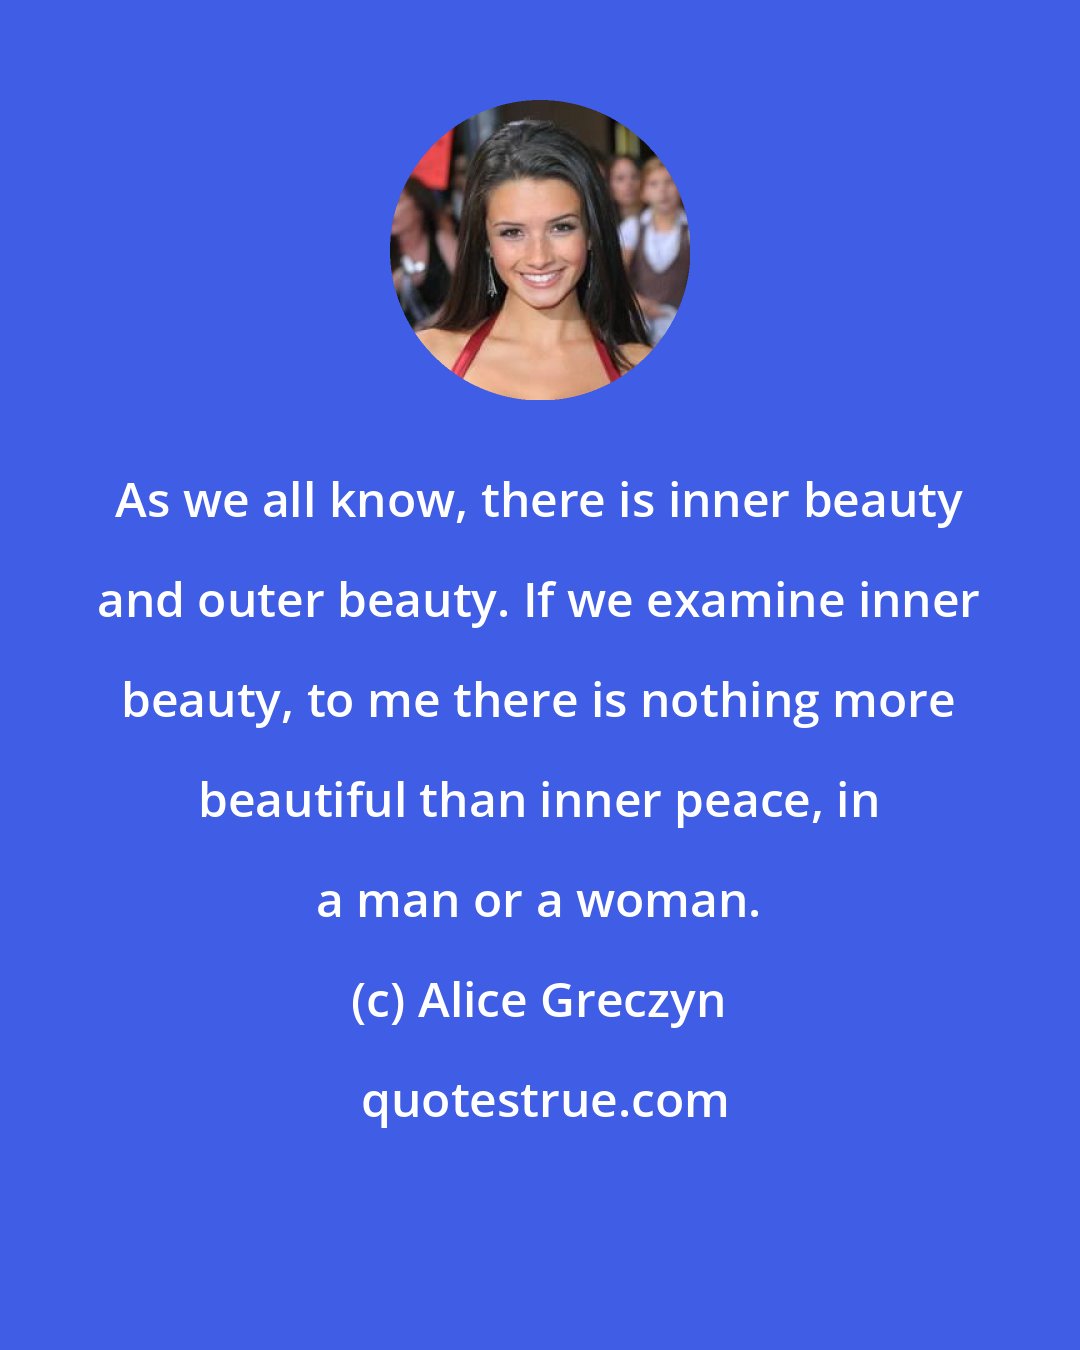 Alice Greczyn: As we all know, there is inner beauty and outer beauty. If we examine inner beauty, to me there is nothing more beautiful than inner peace, in a man or a woman.